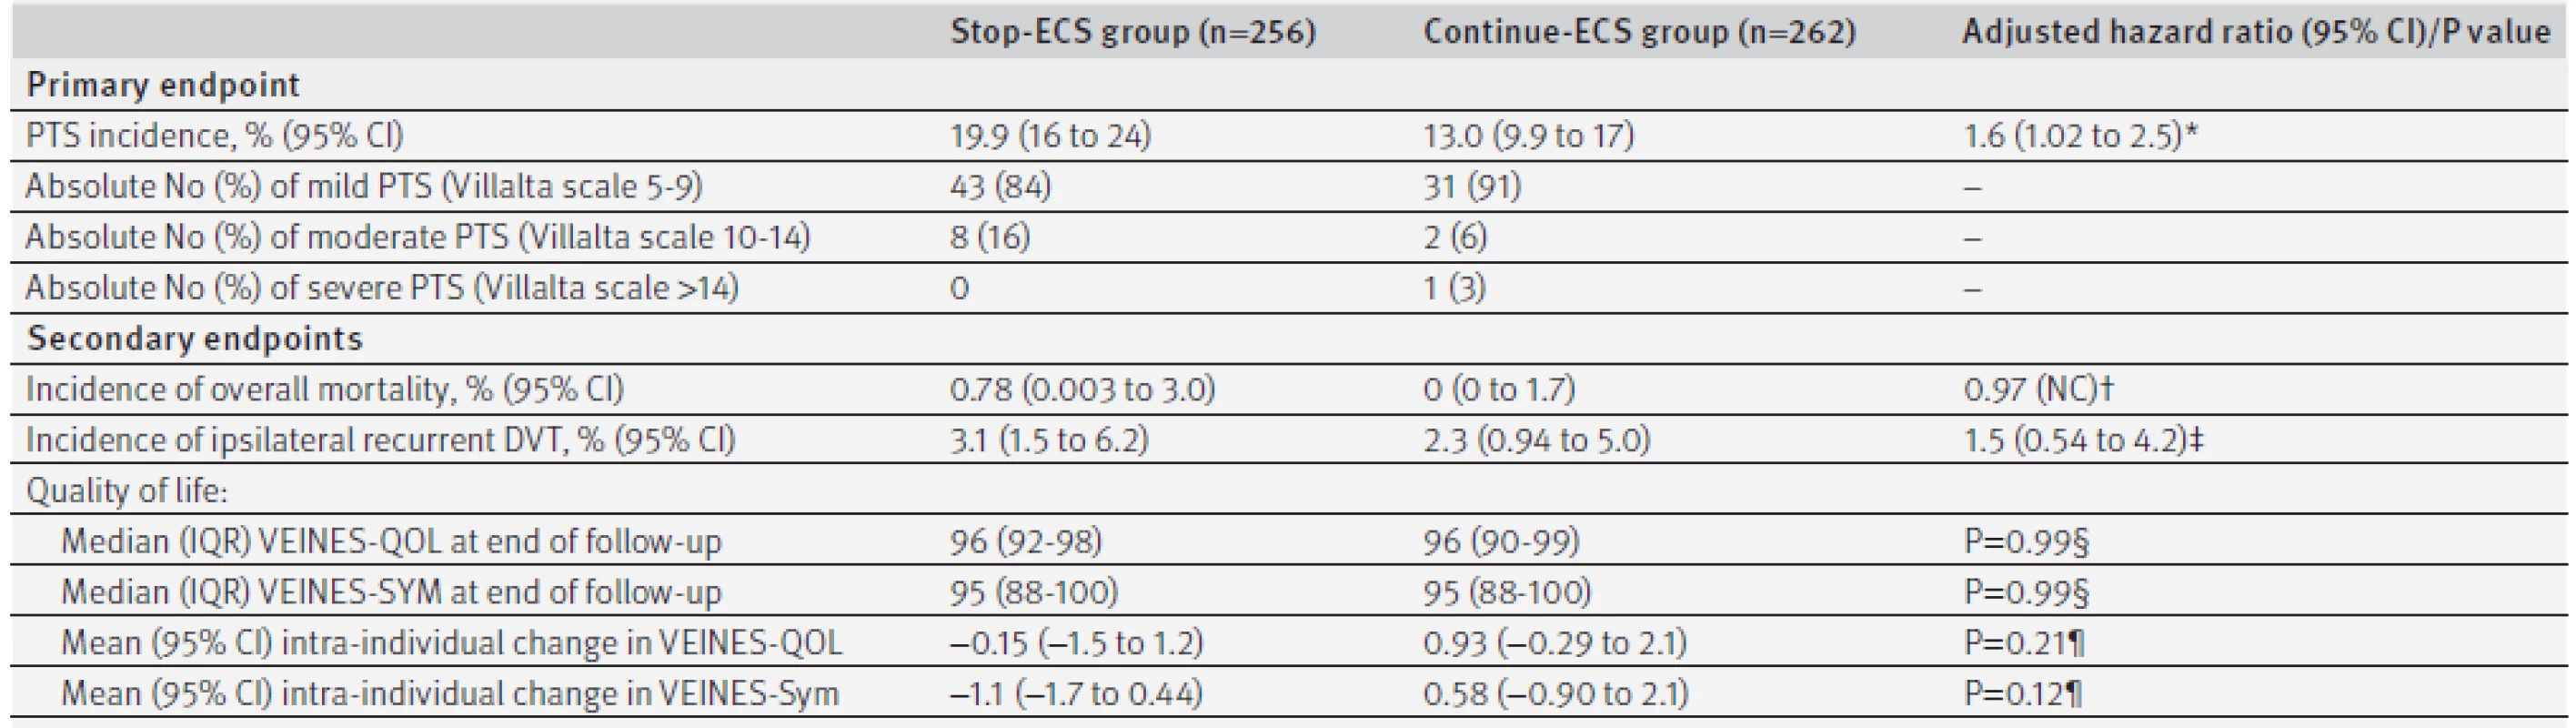 Primary and secondary endpoints by treatment group